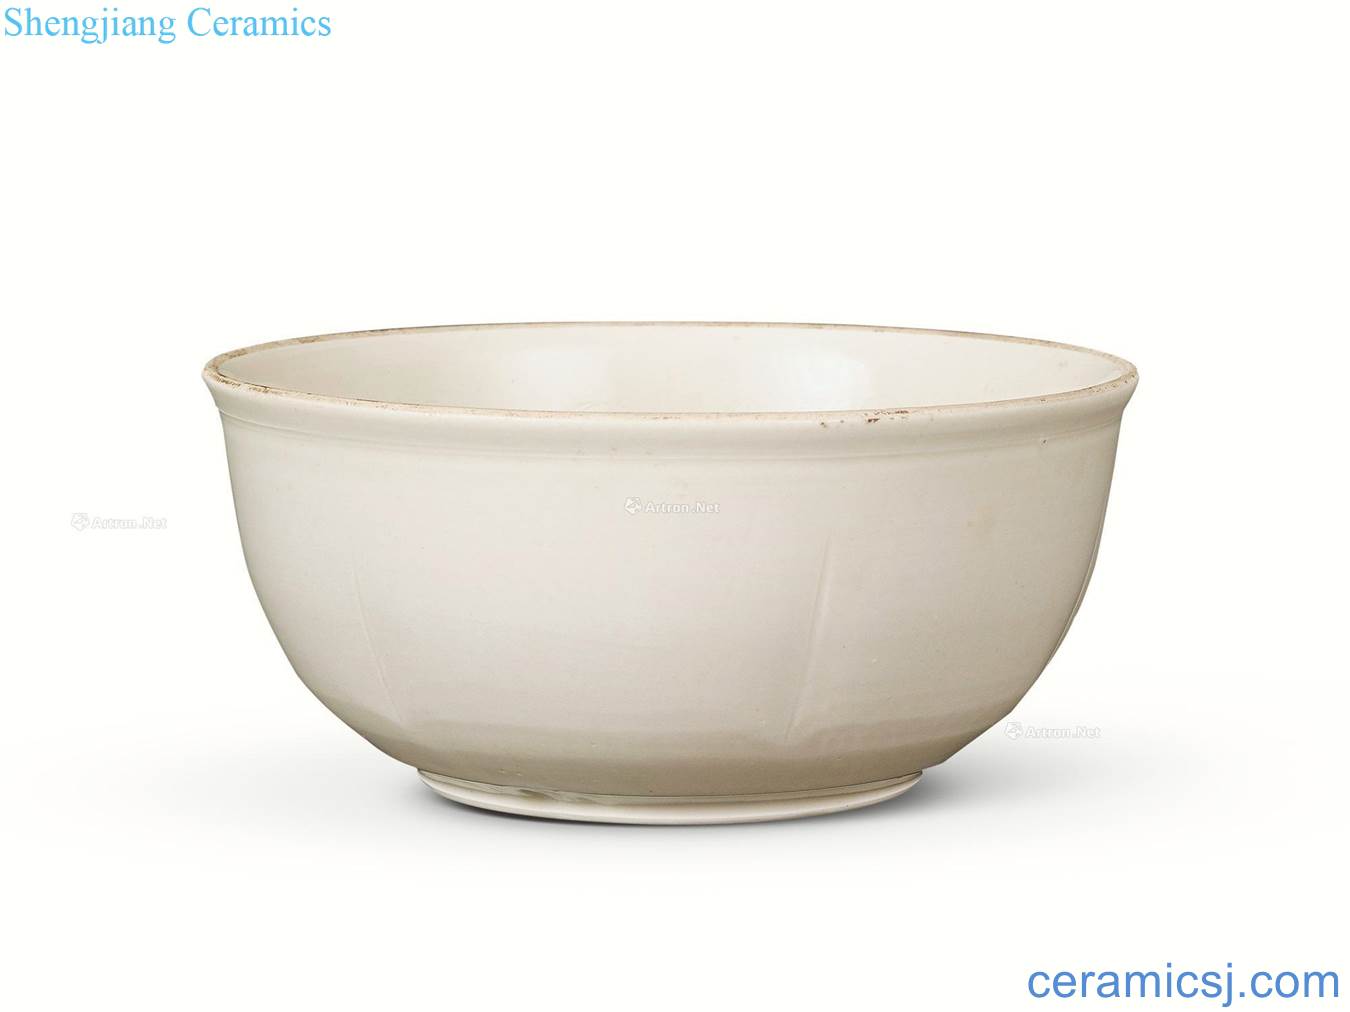 The song dynasty kiln scratching bowl